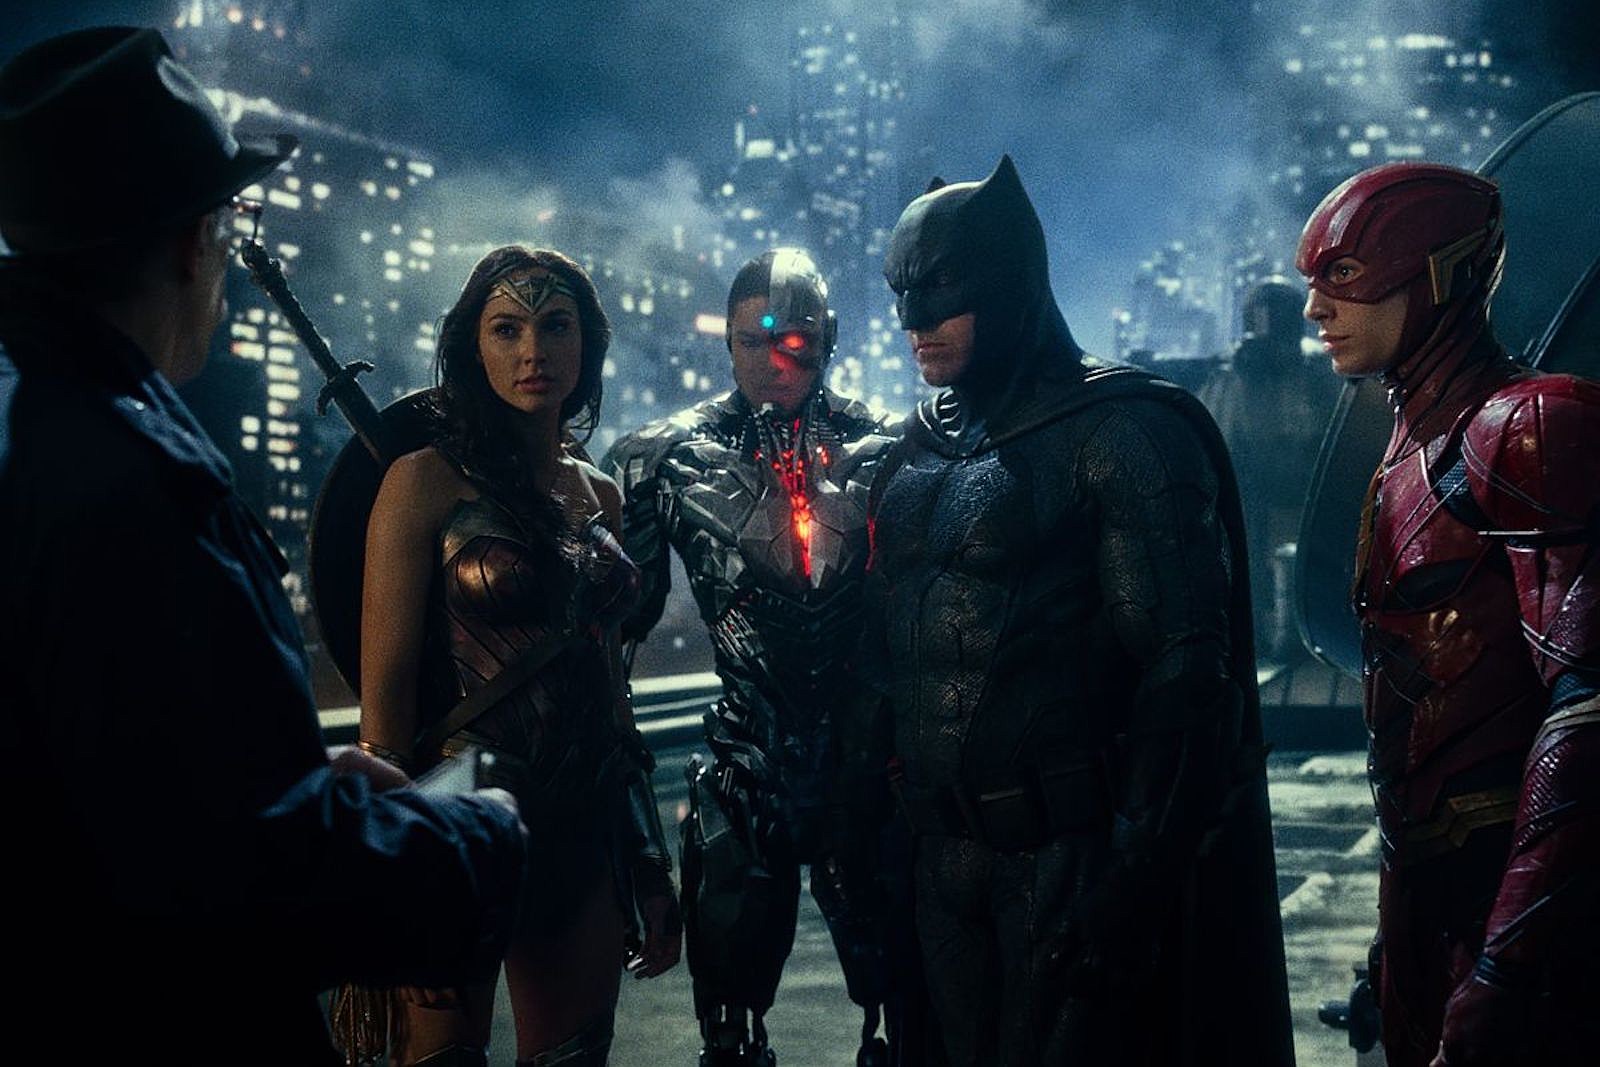 Justice League Snyder Cut Ending Will Set Up Potential Sequel